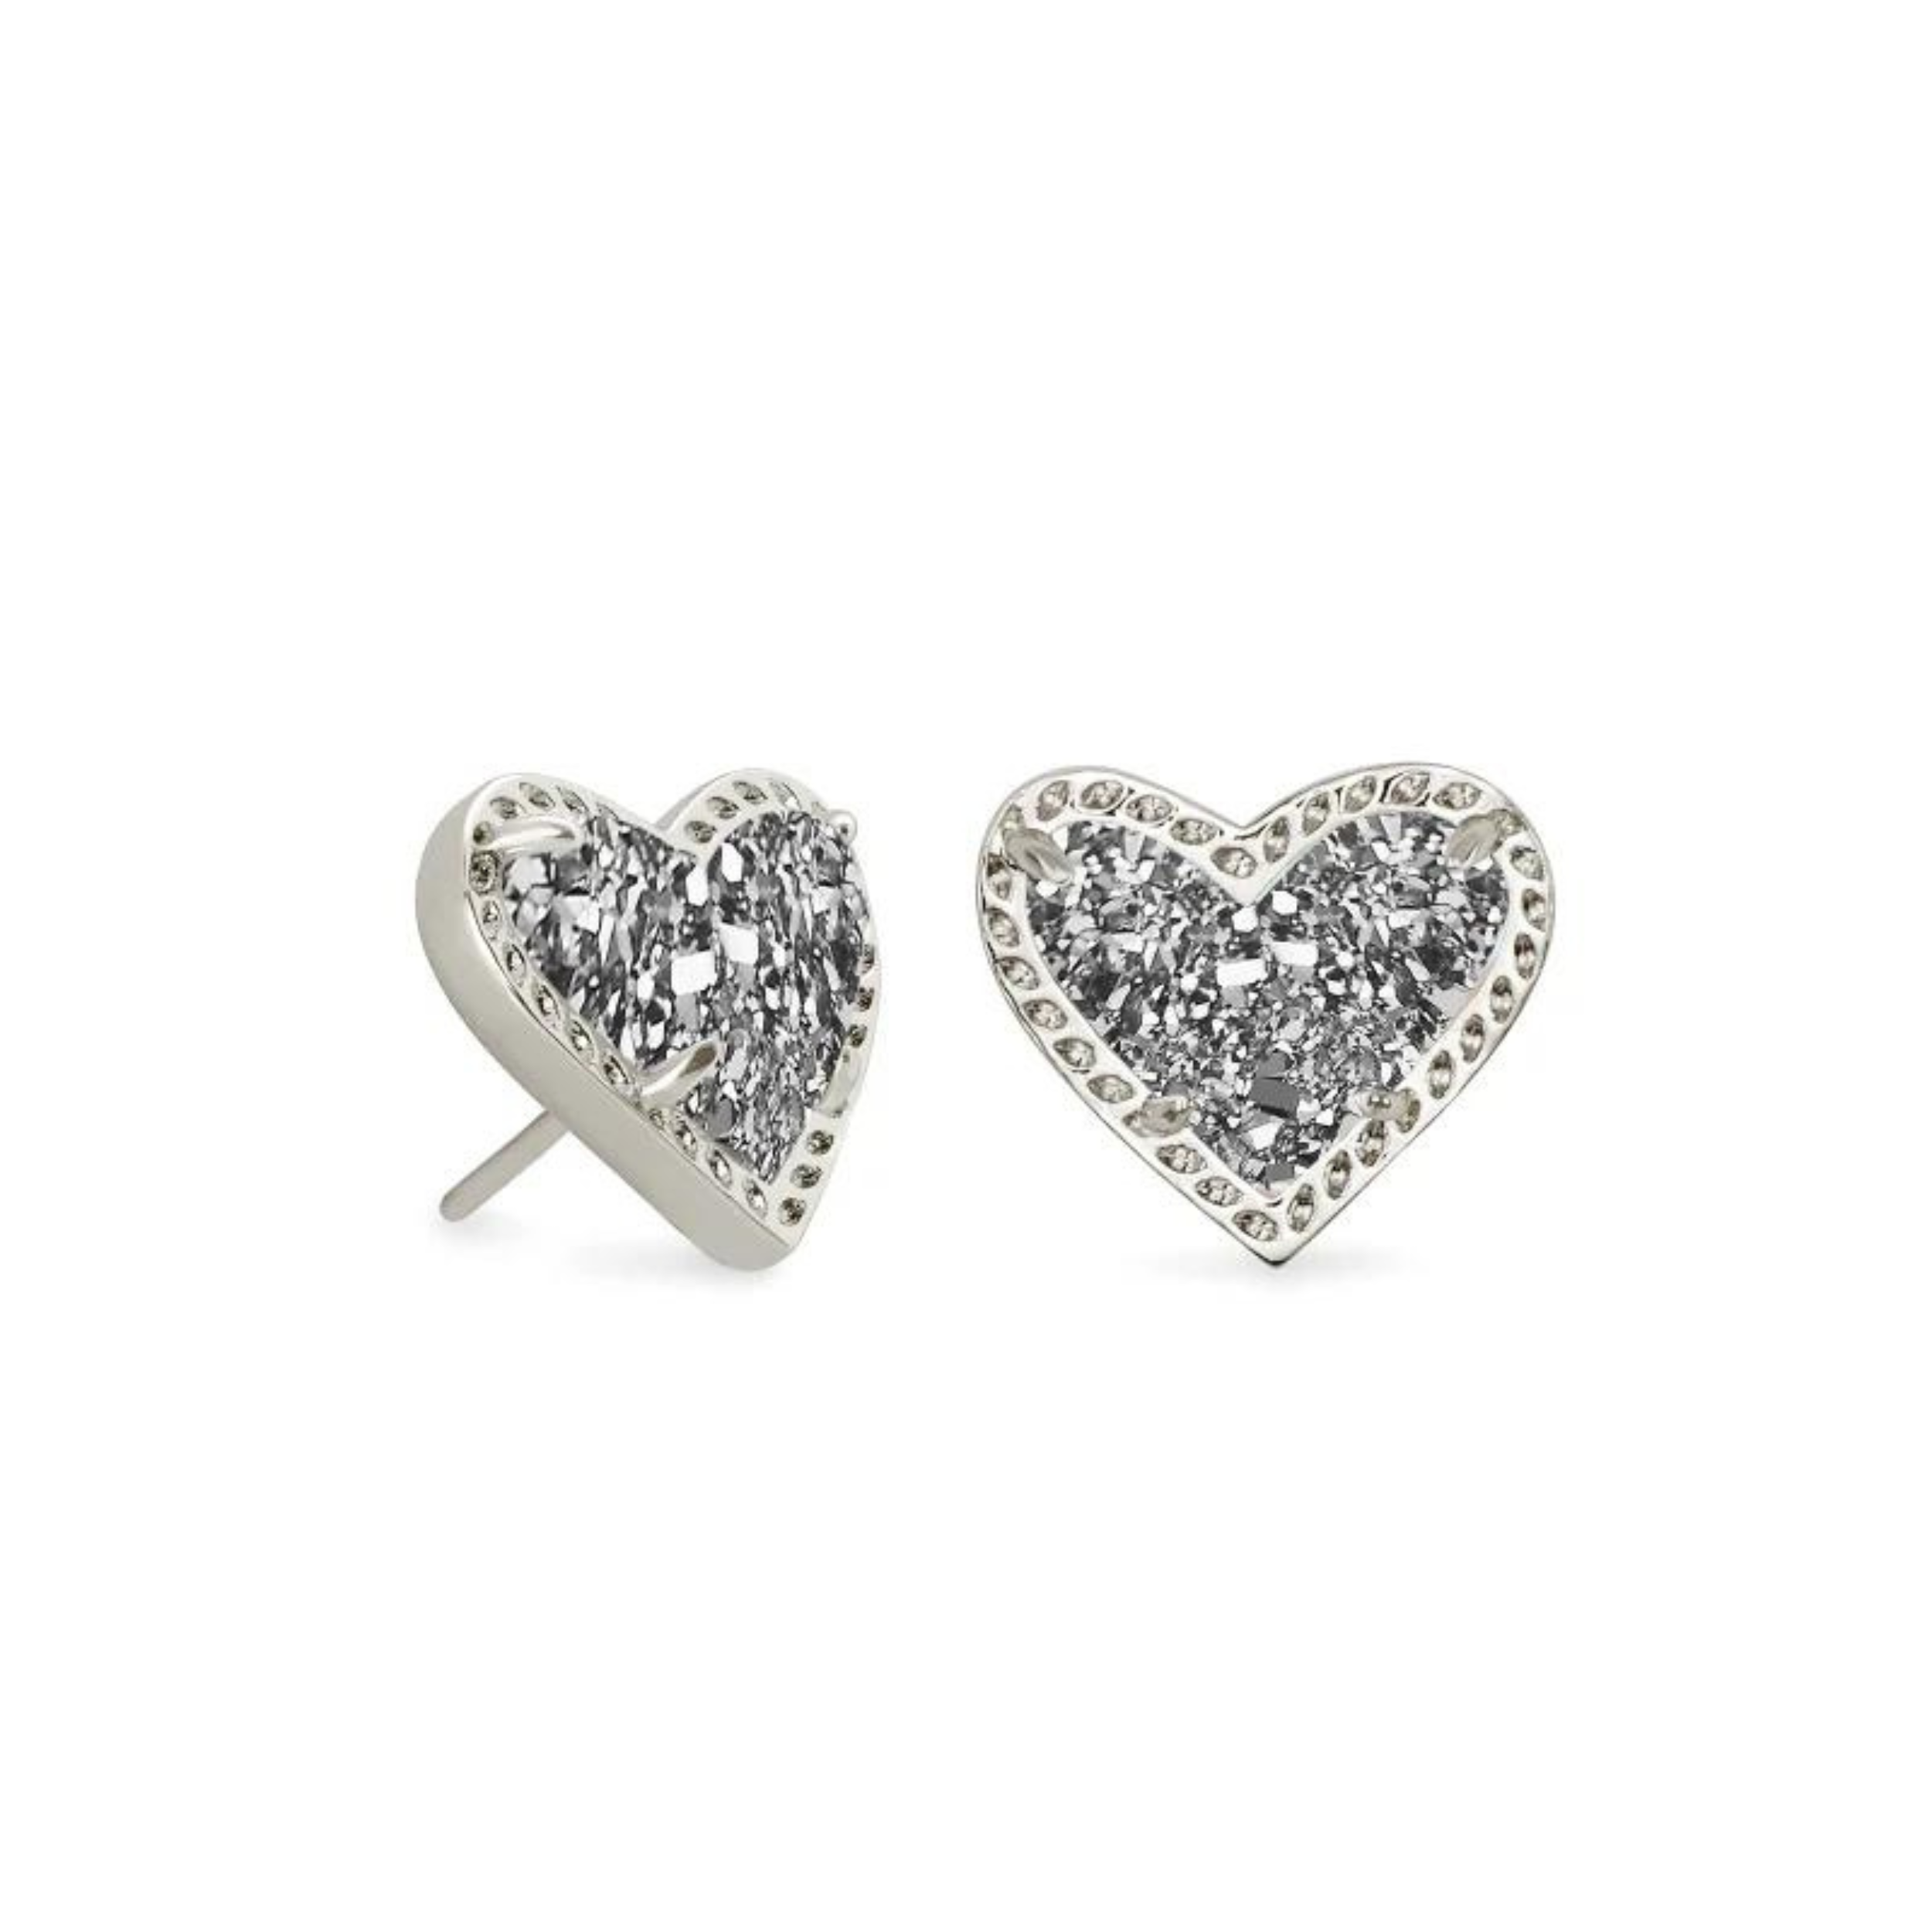 SIlver drusy heart stud earrings pictured on a white background.